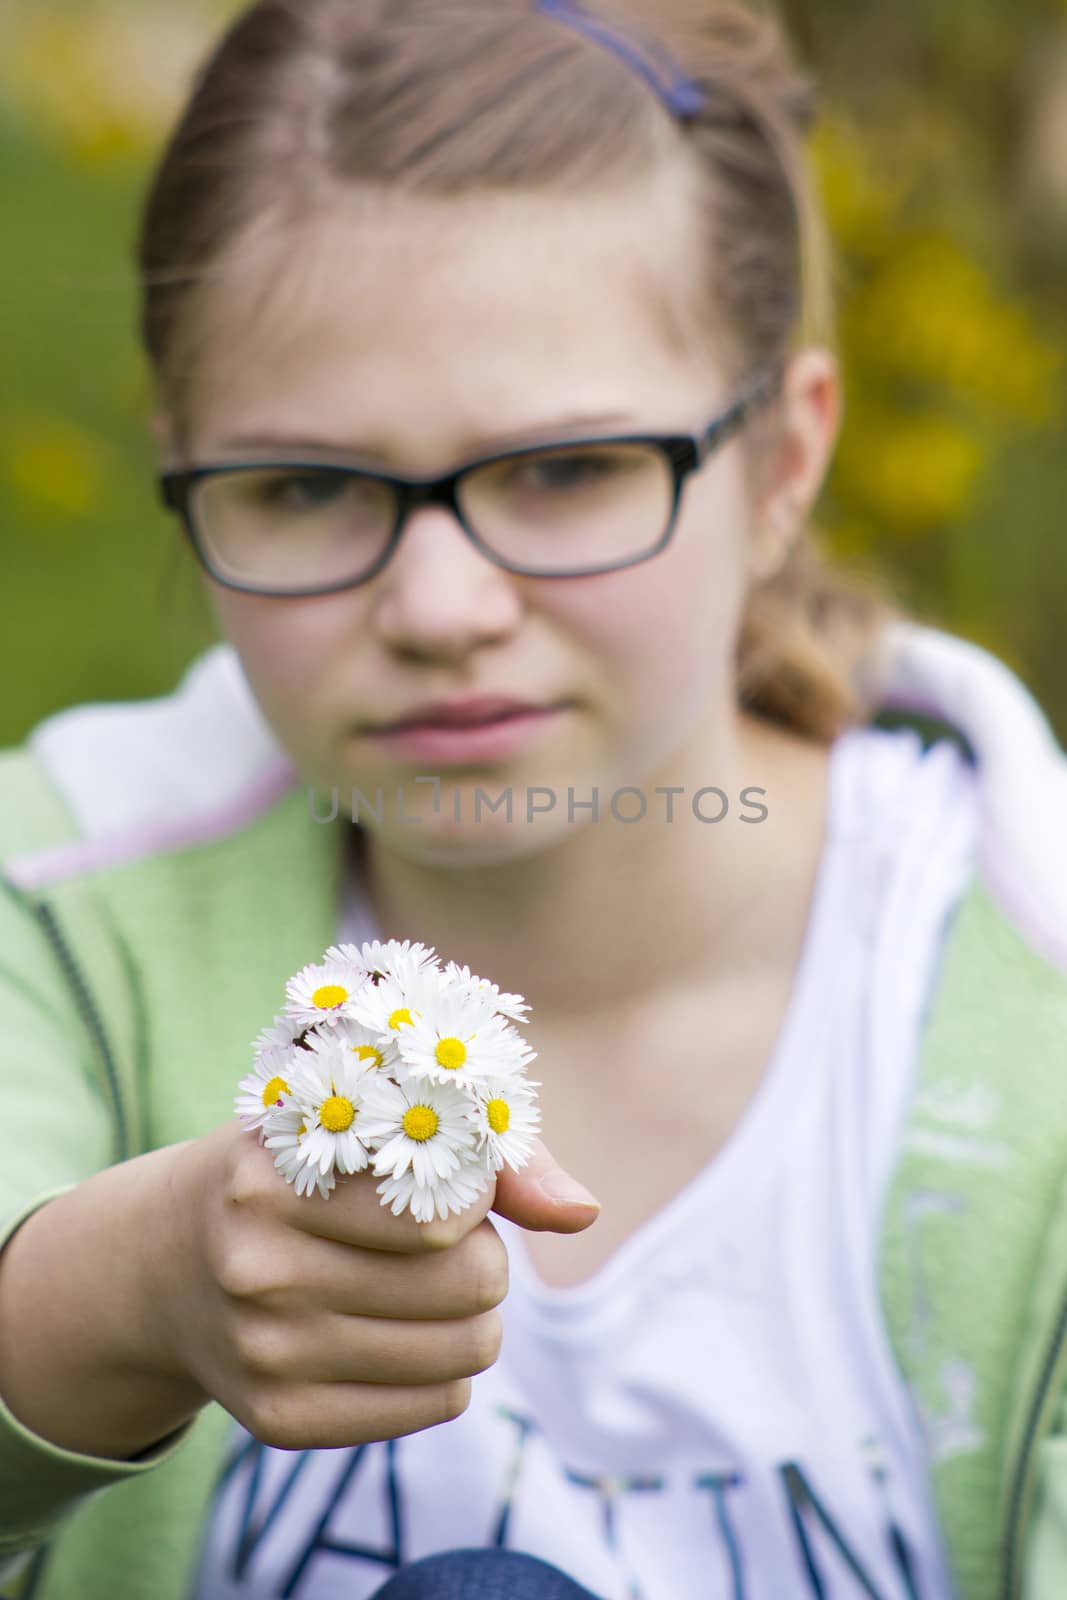 daisies - a gift for the mother